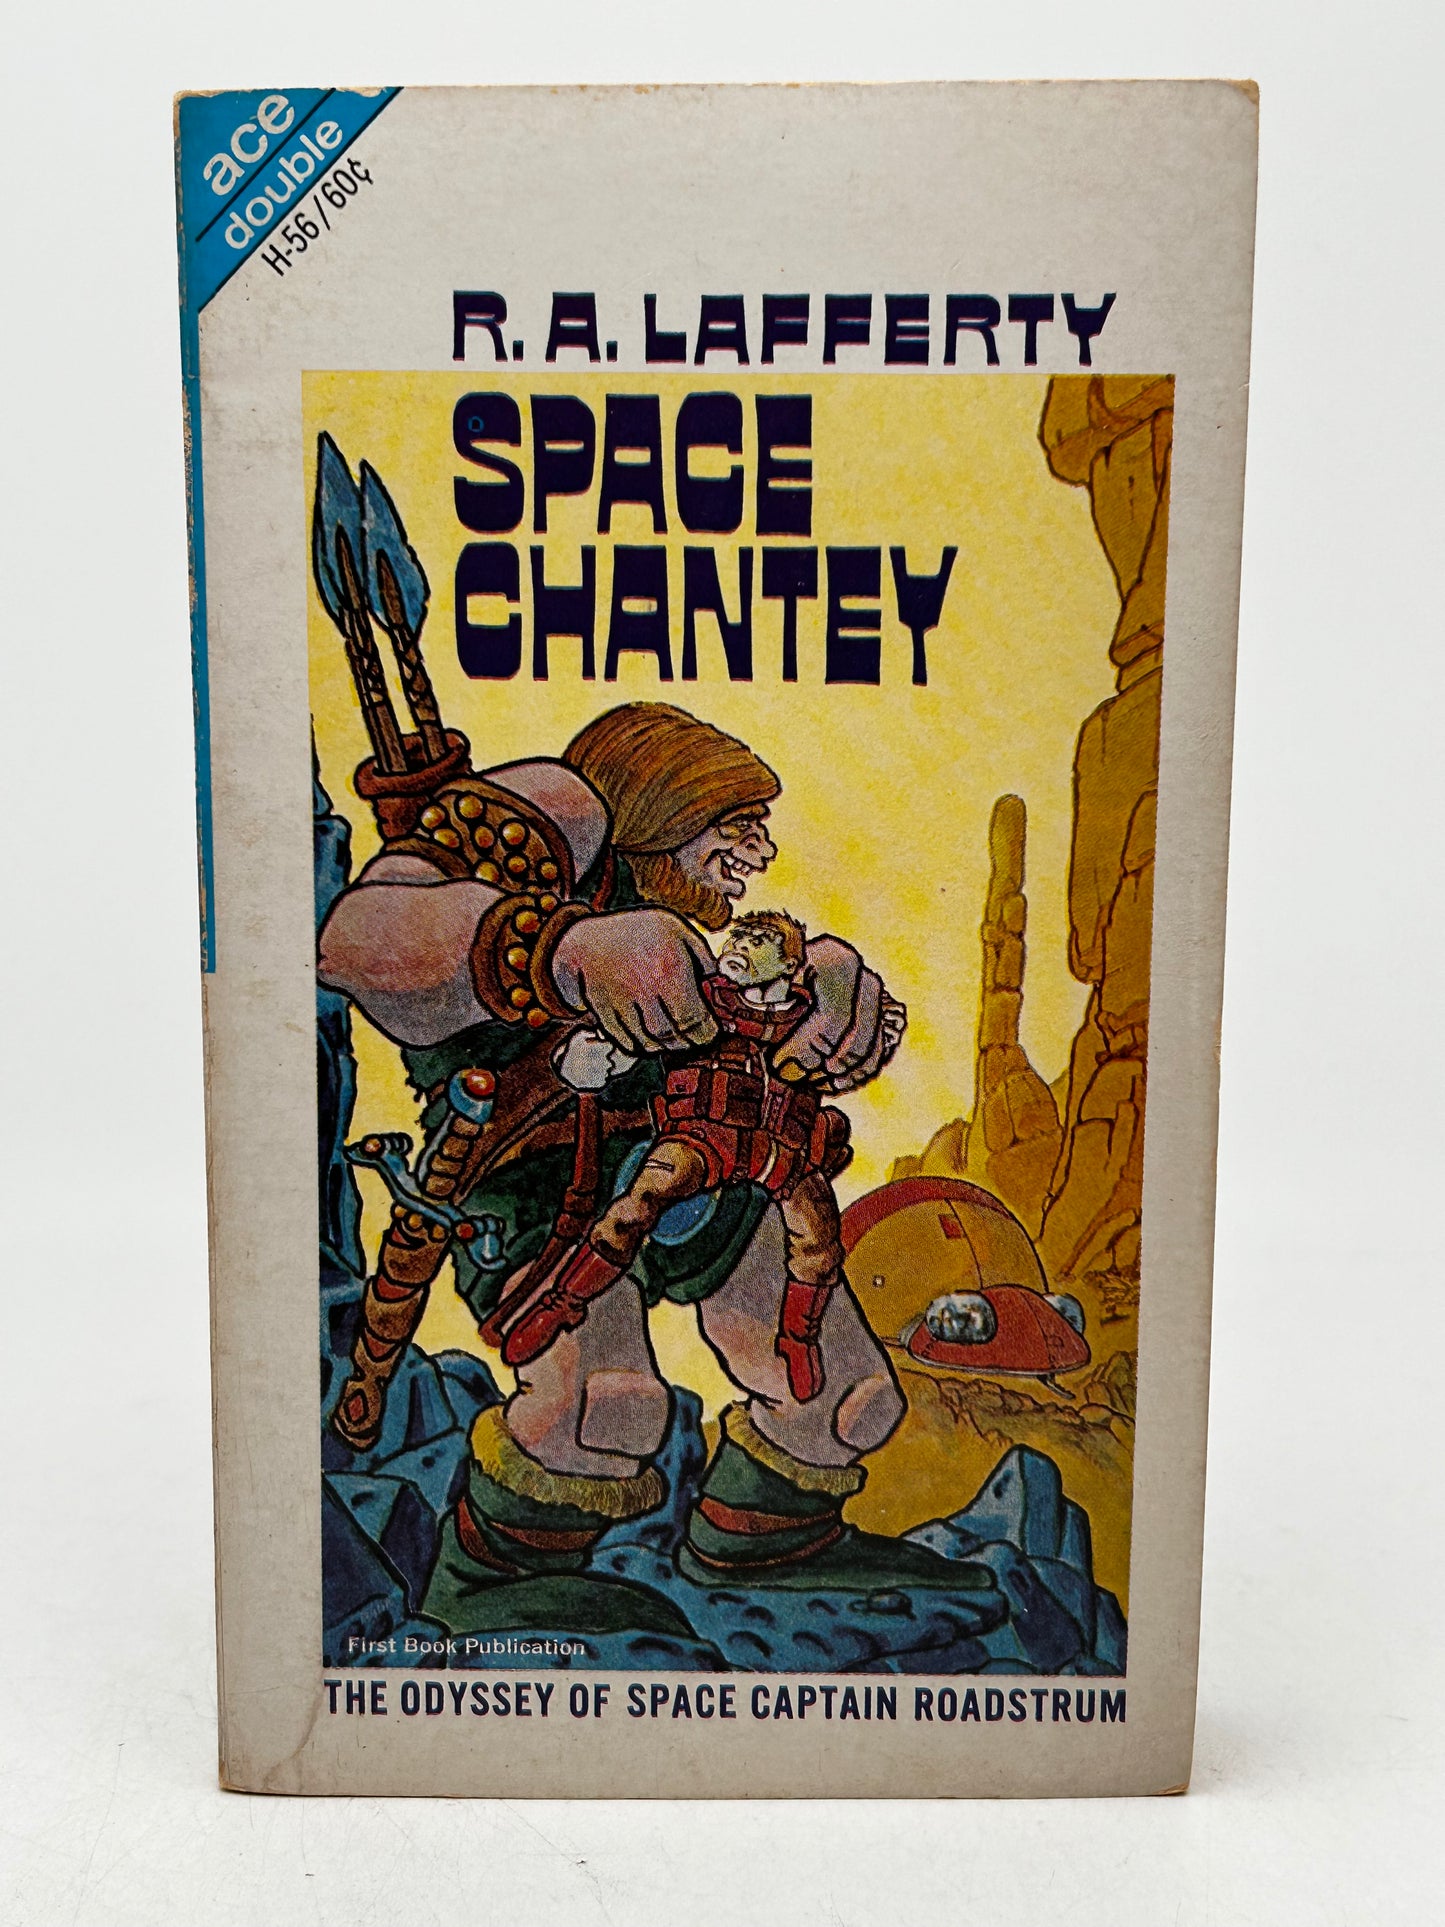 Pity About The Earth/Space Chantey ACE DOUBLE Paperback Hill/Lafferty SF11